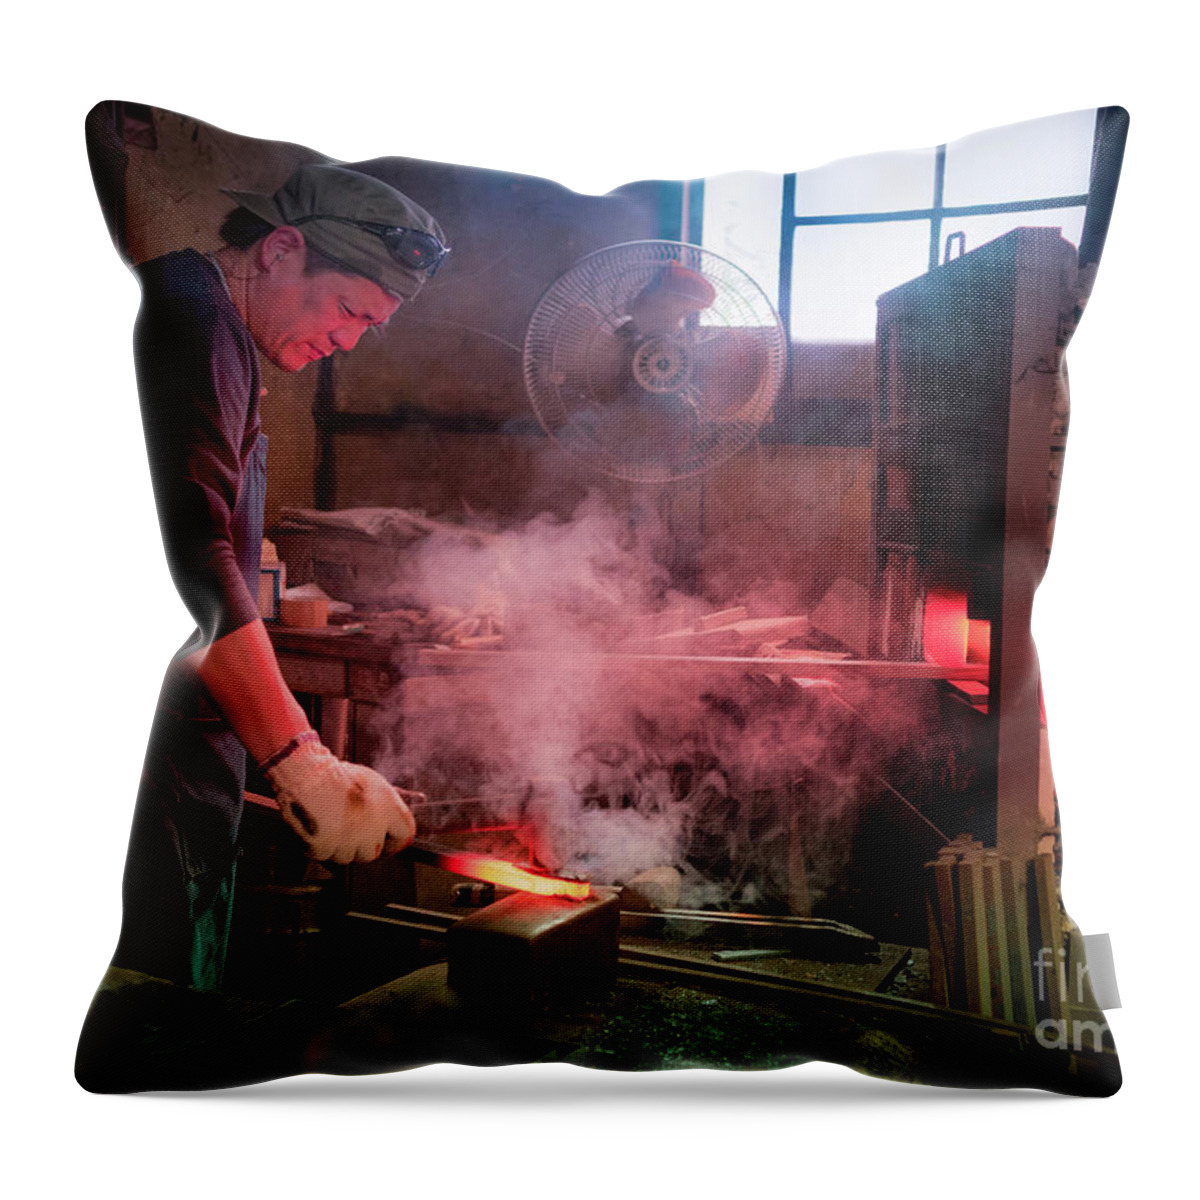 Blacksmith Throw Pillow featuring the photograph 4th Generation Blacksmith, Miki City Japan by Perry Rodriguez